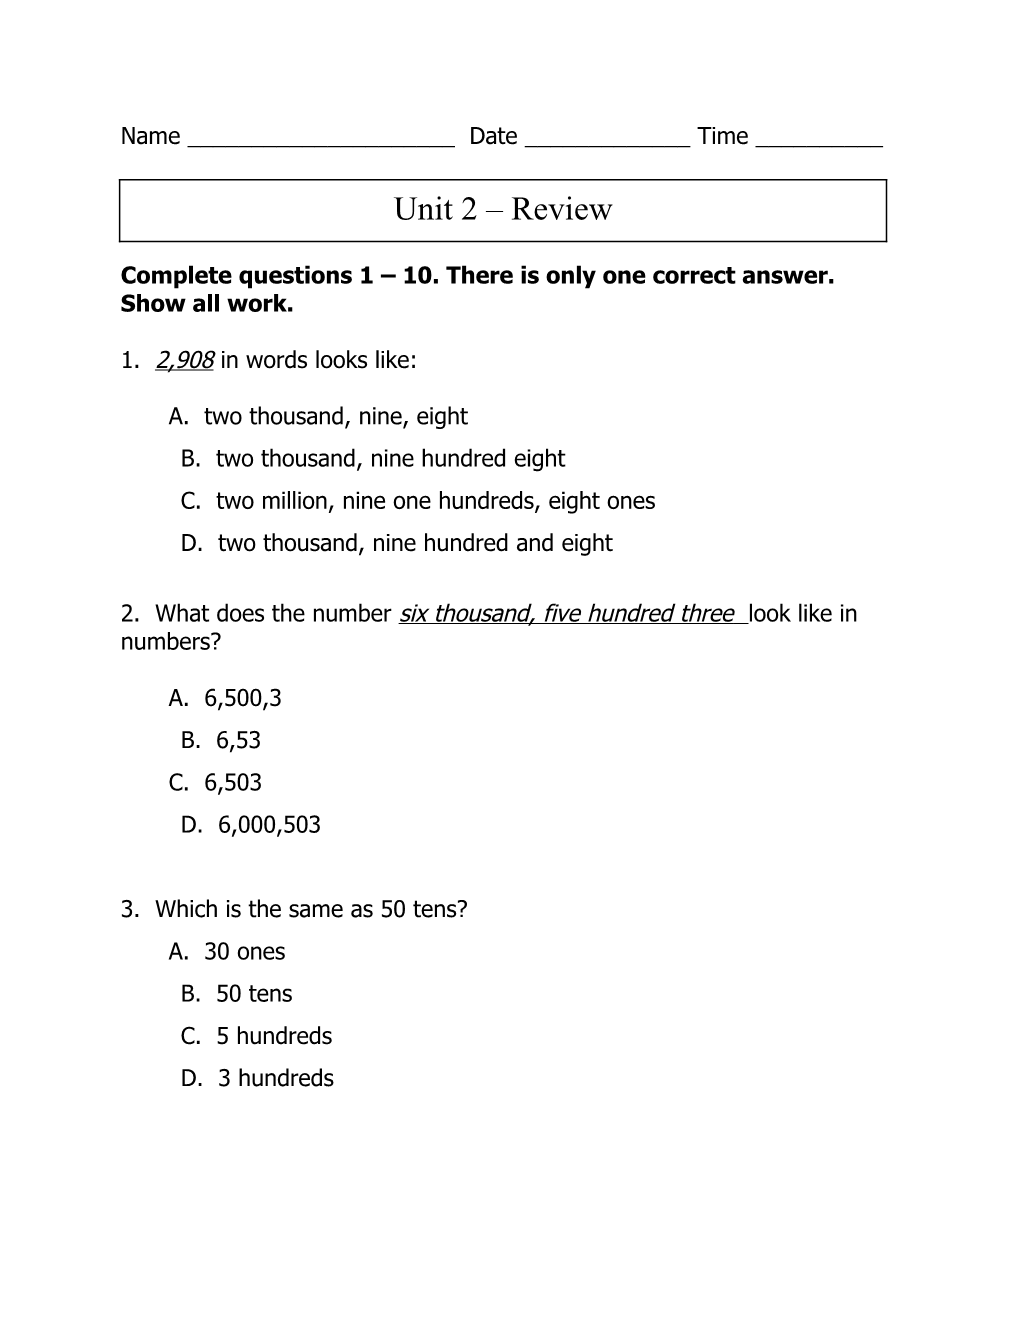 Complete Questions 1 10. There Is Only One Correct Answer. Show All Work